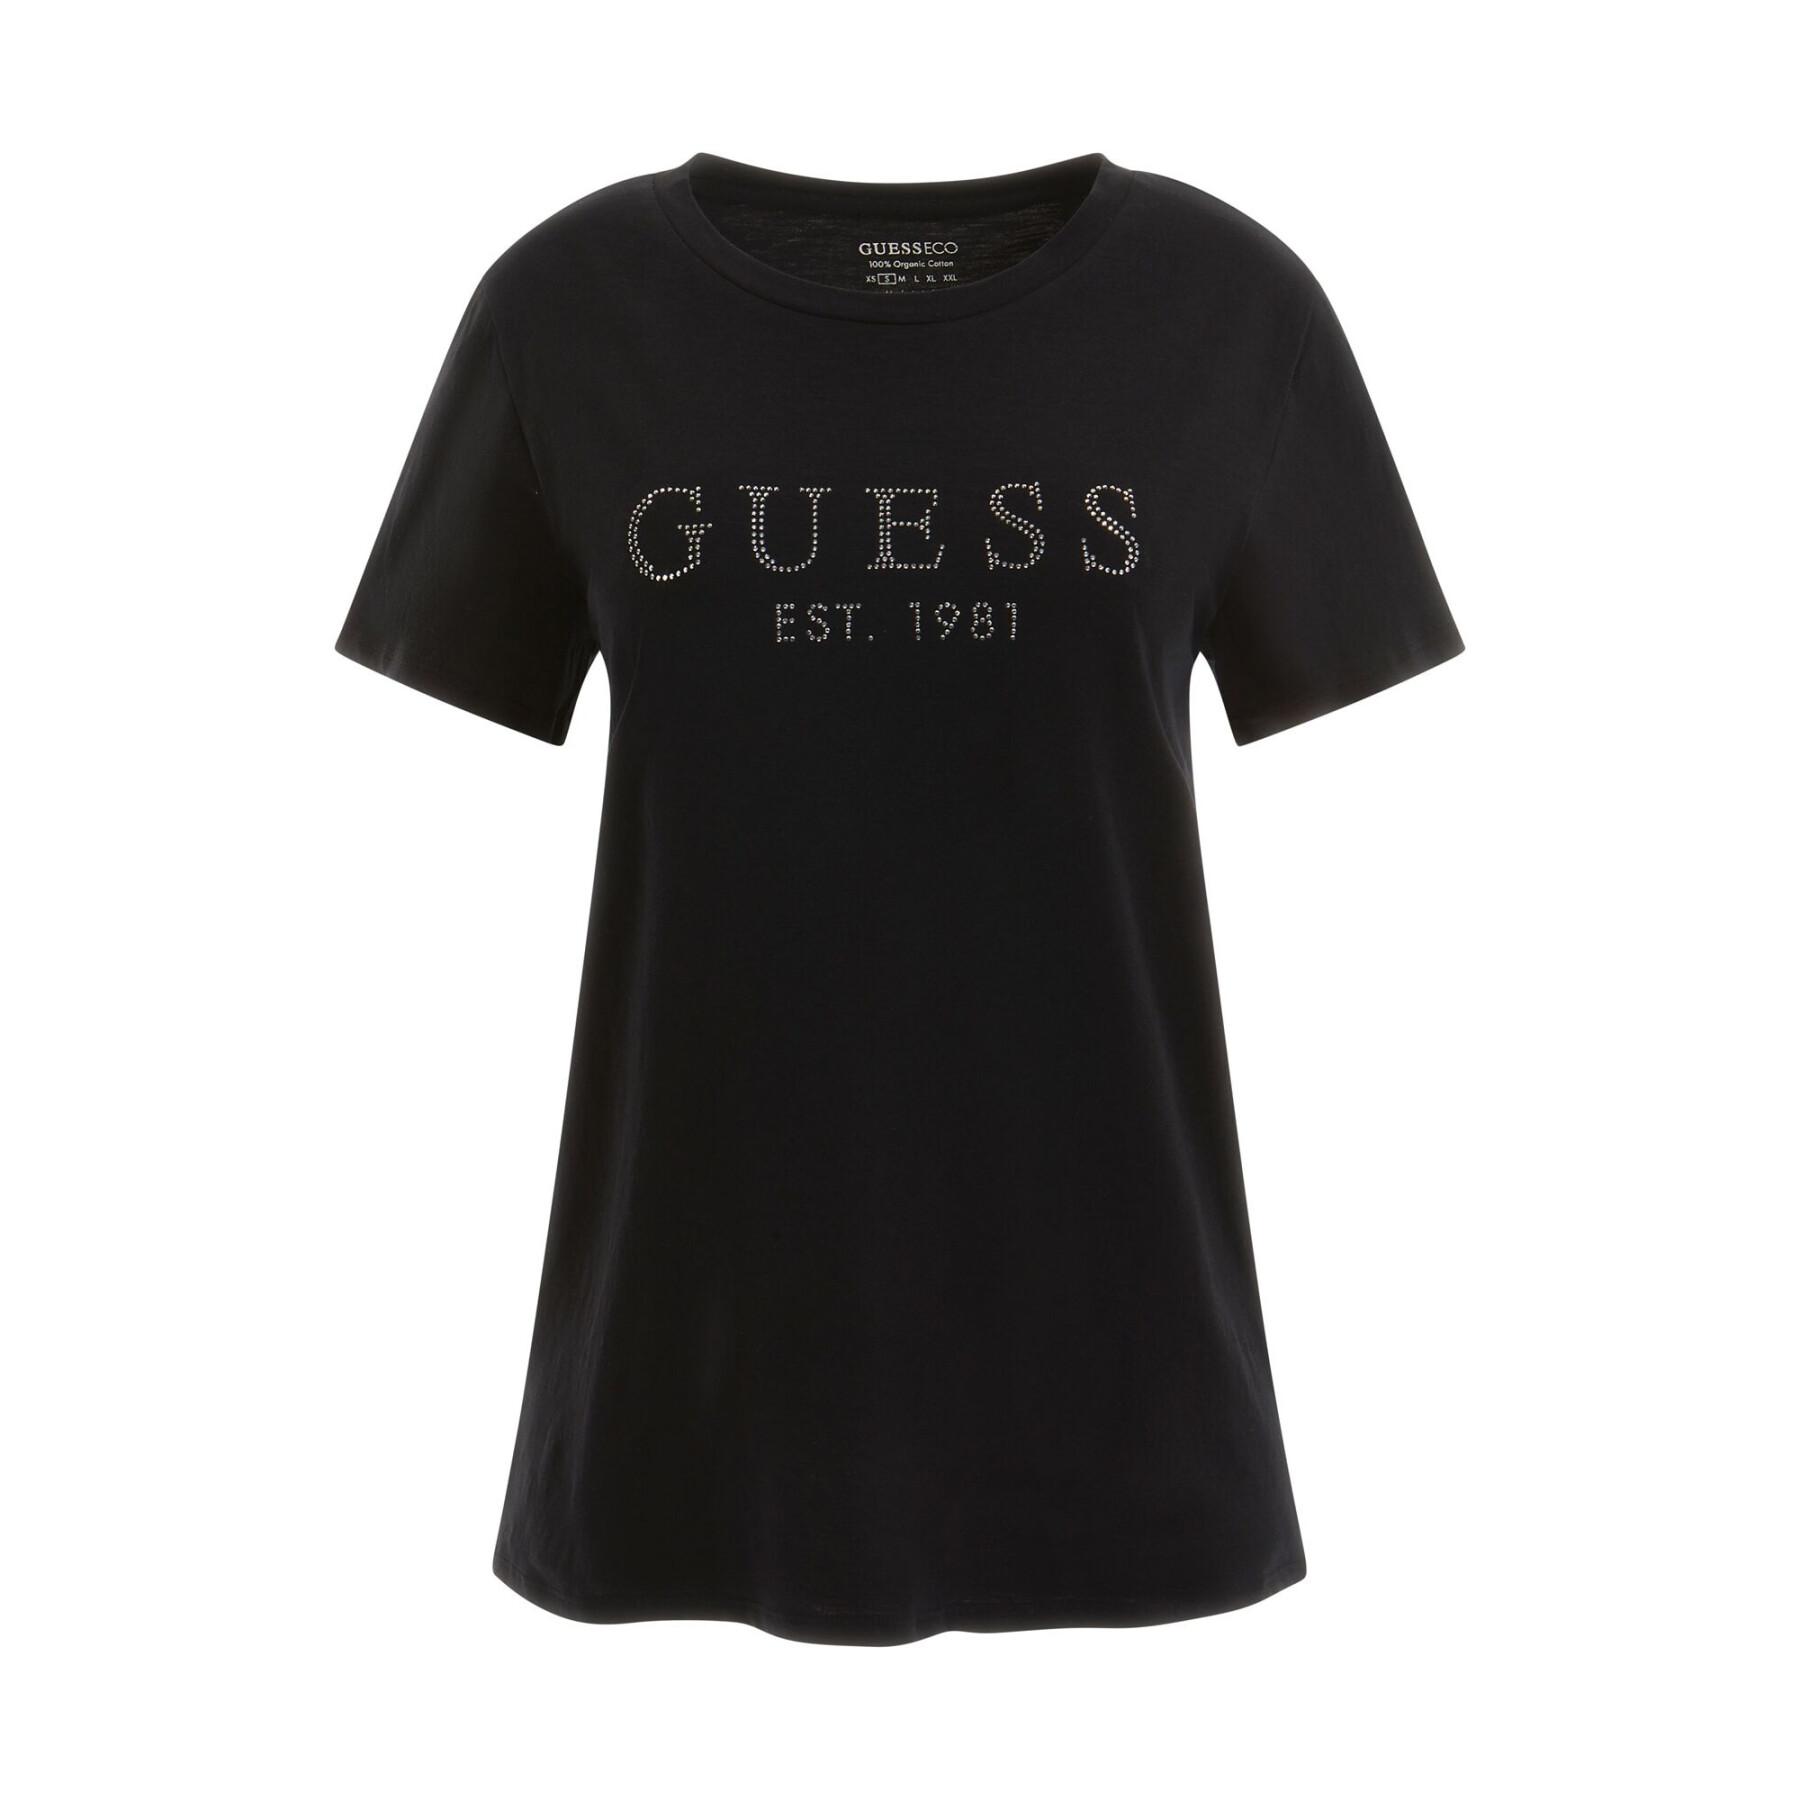 T-shirt femme Guess 1981 Crystal Easy